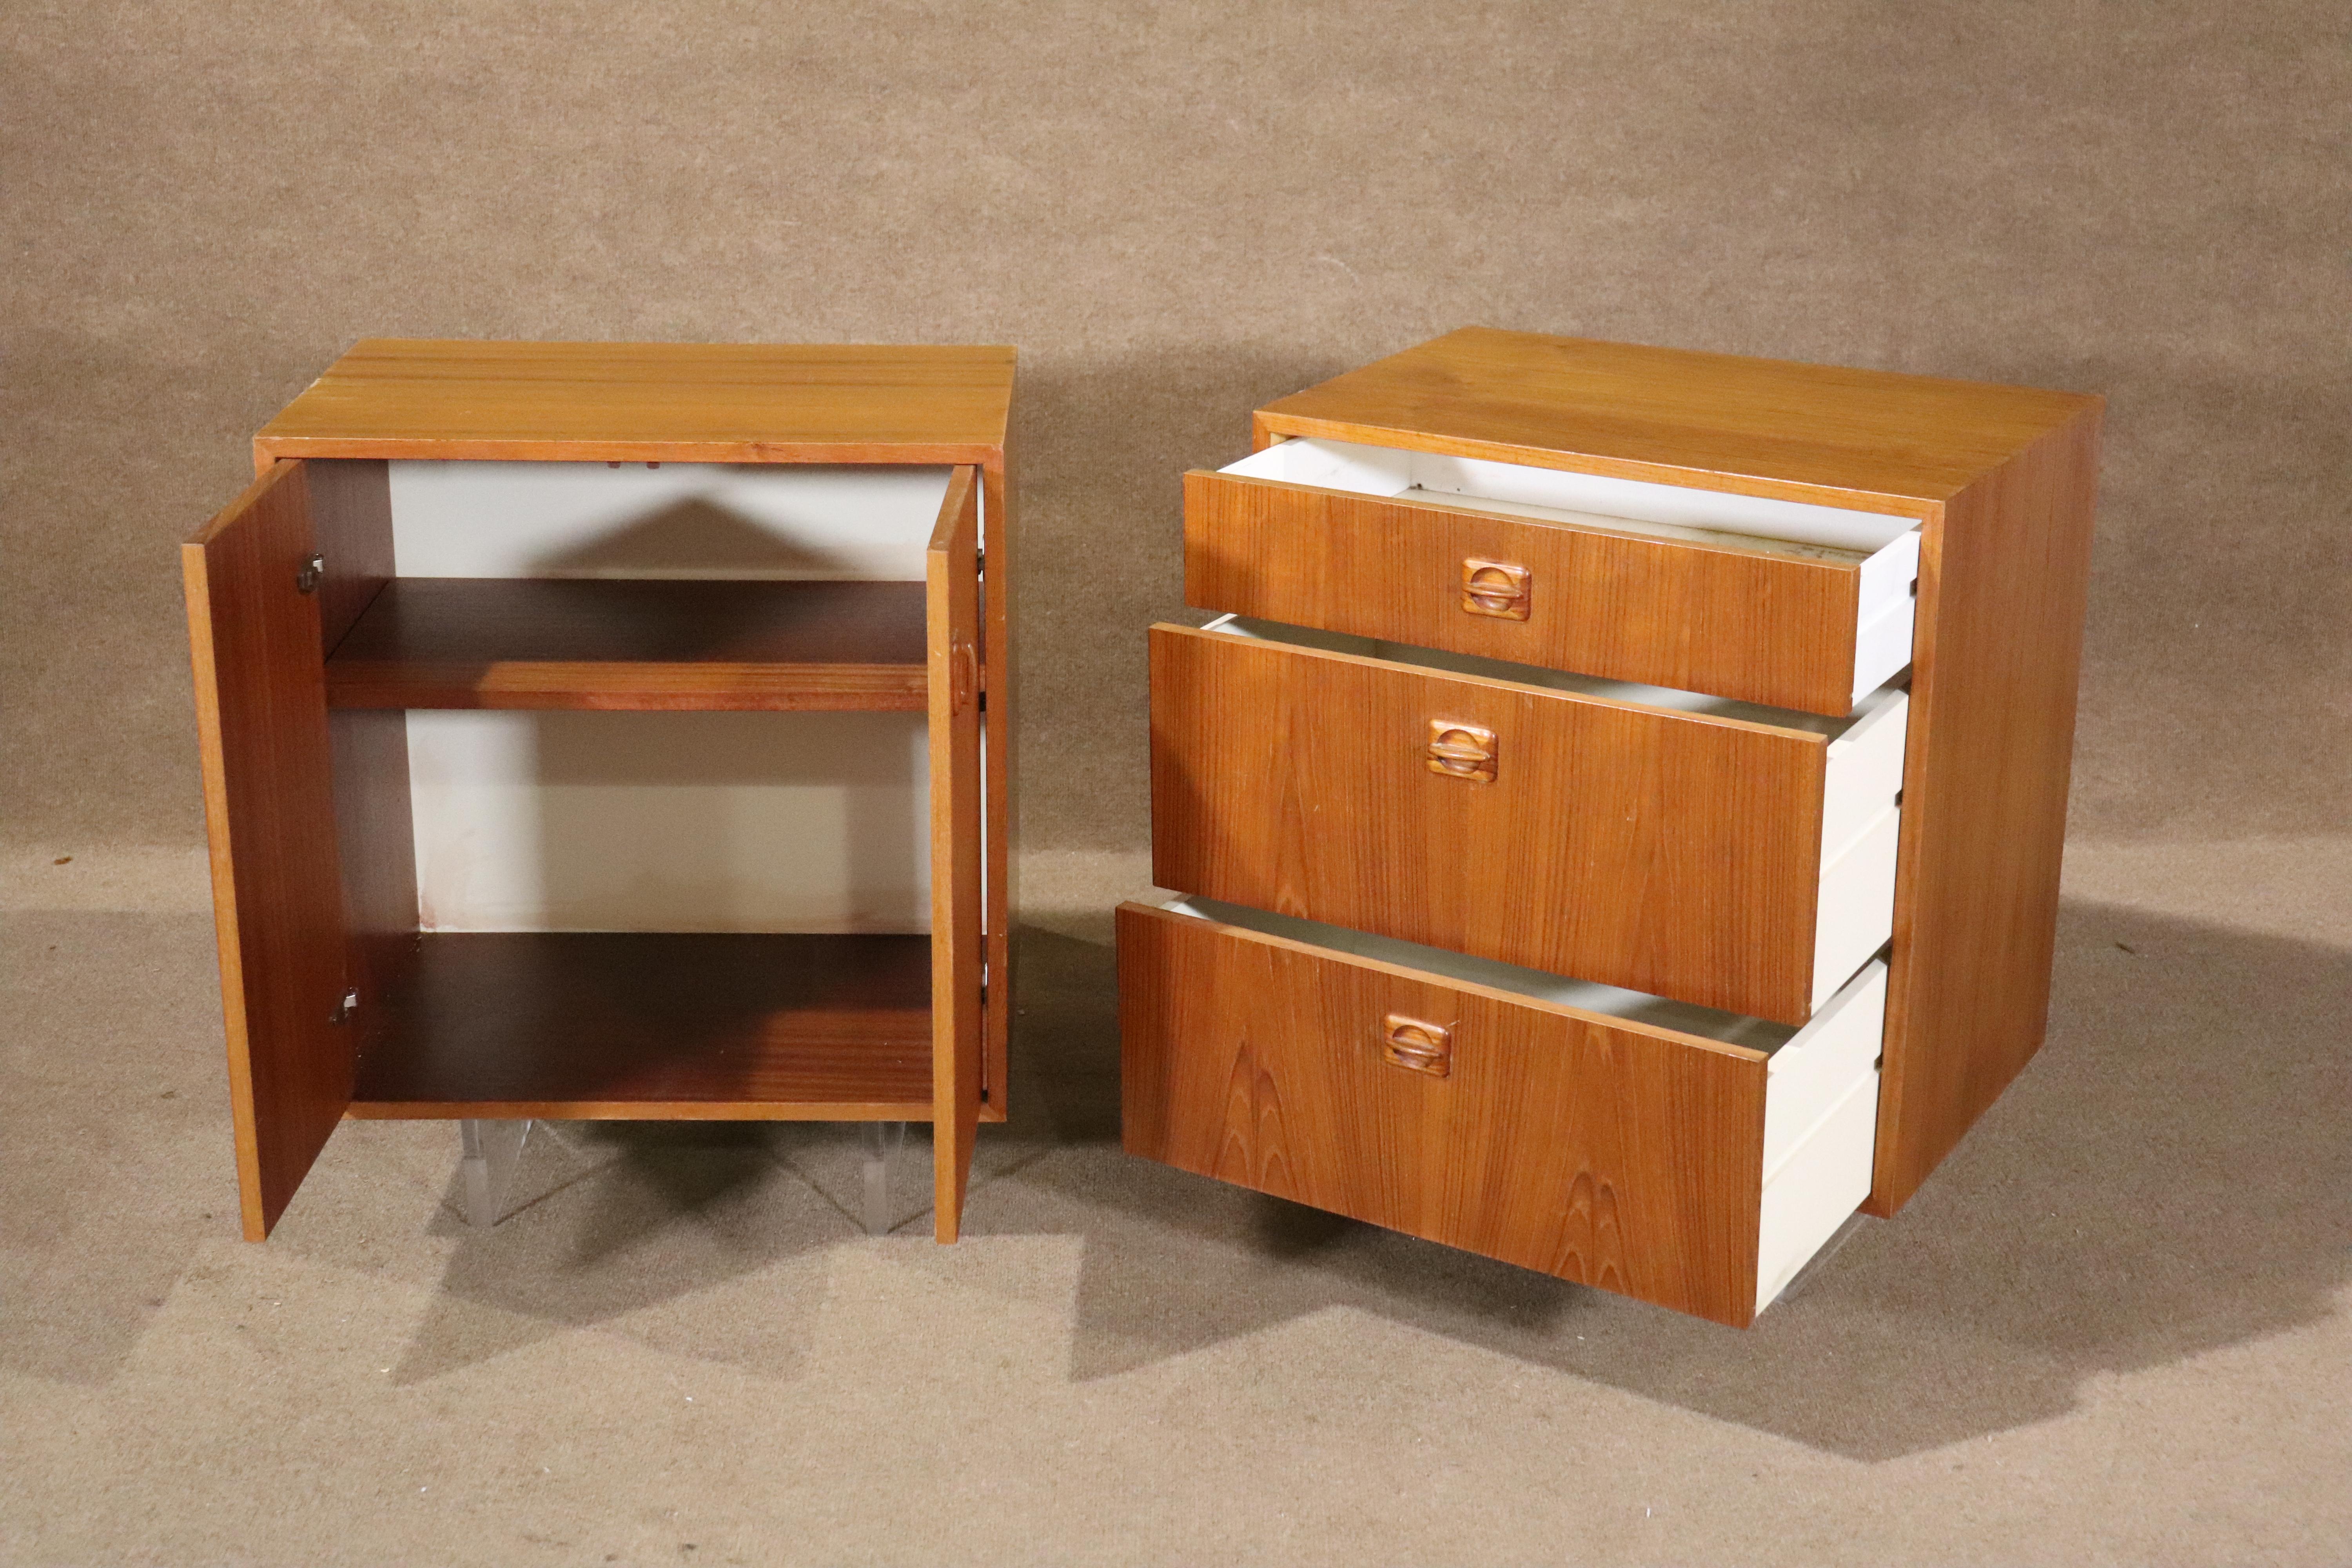 Danish teak companion cabinets set on clear acrylic legs. Two door cabinet and three drawer dresser. Great as bedside tables.
Please confirm location NY or NJ